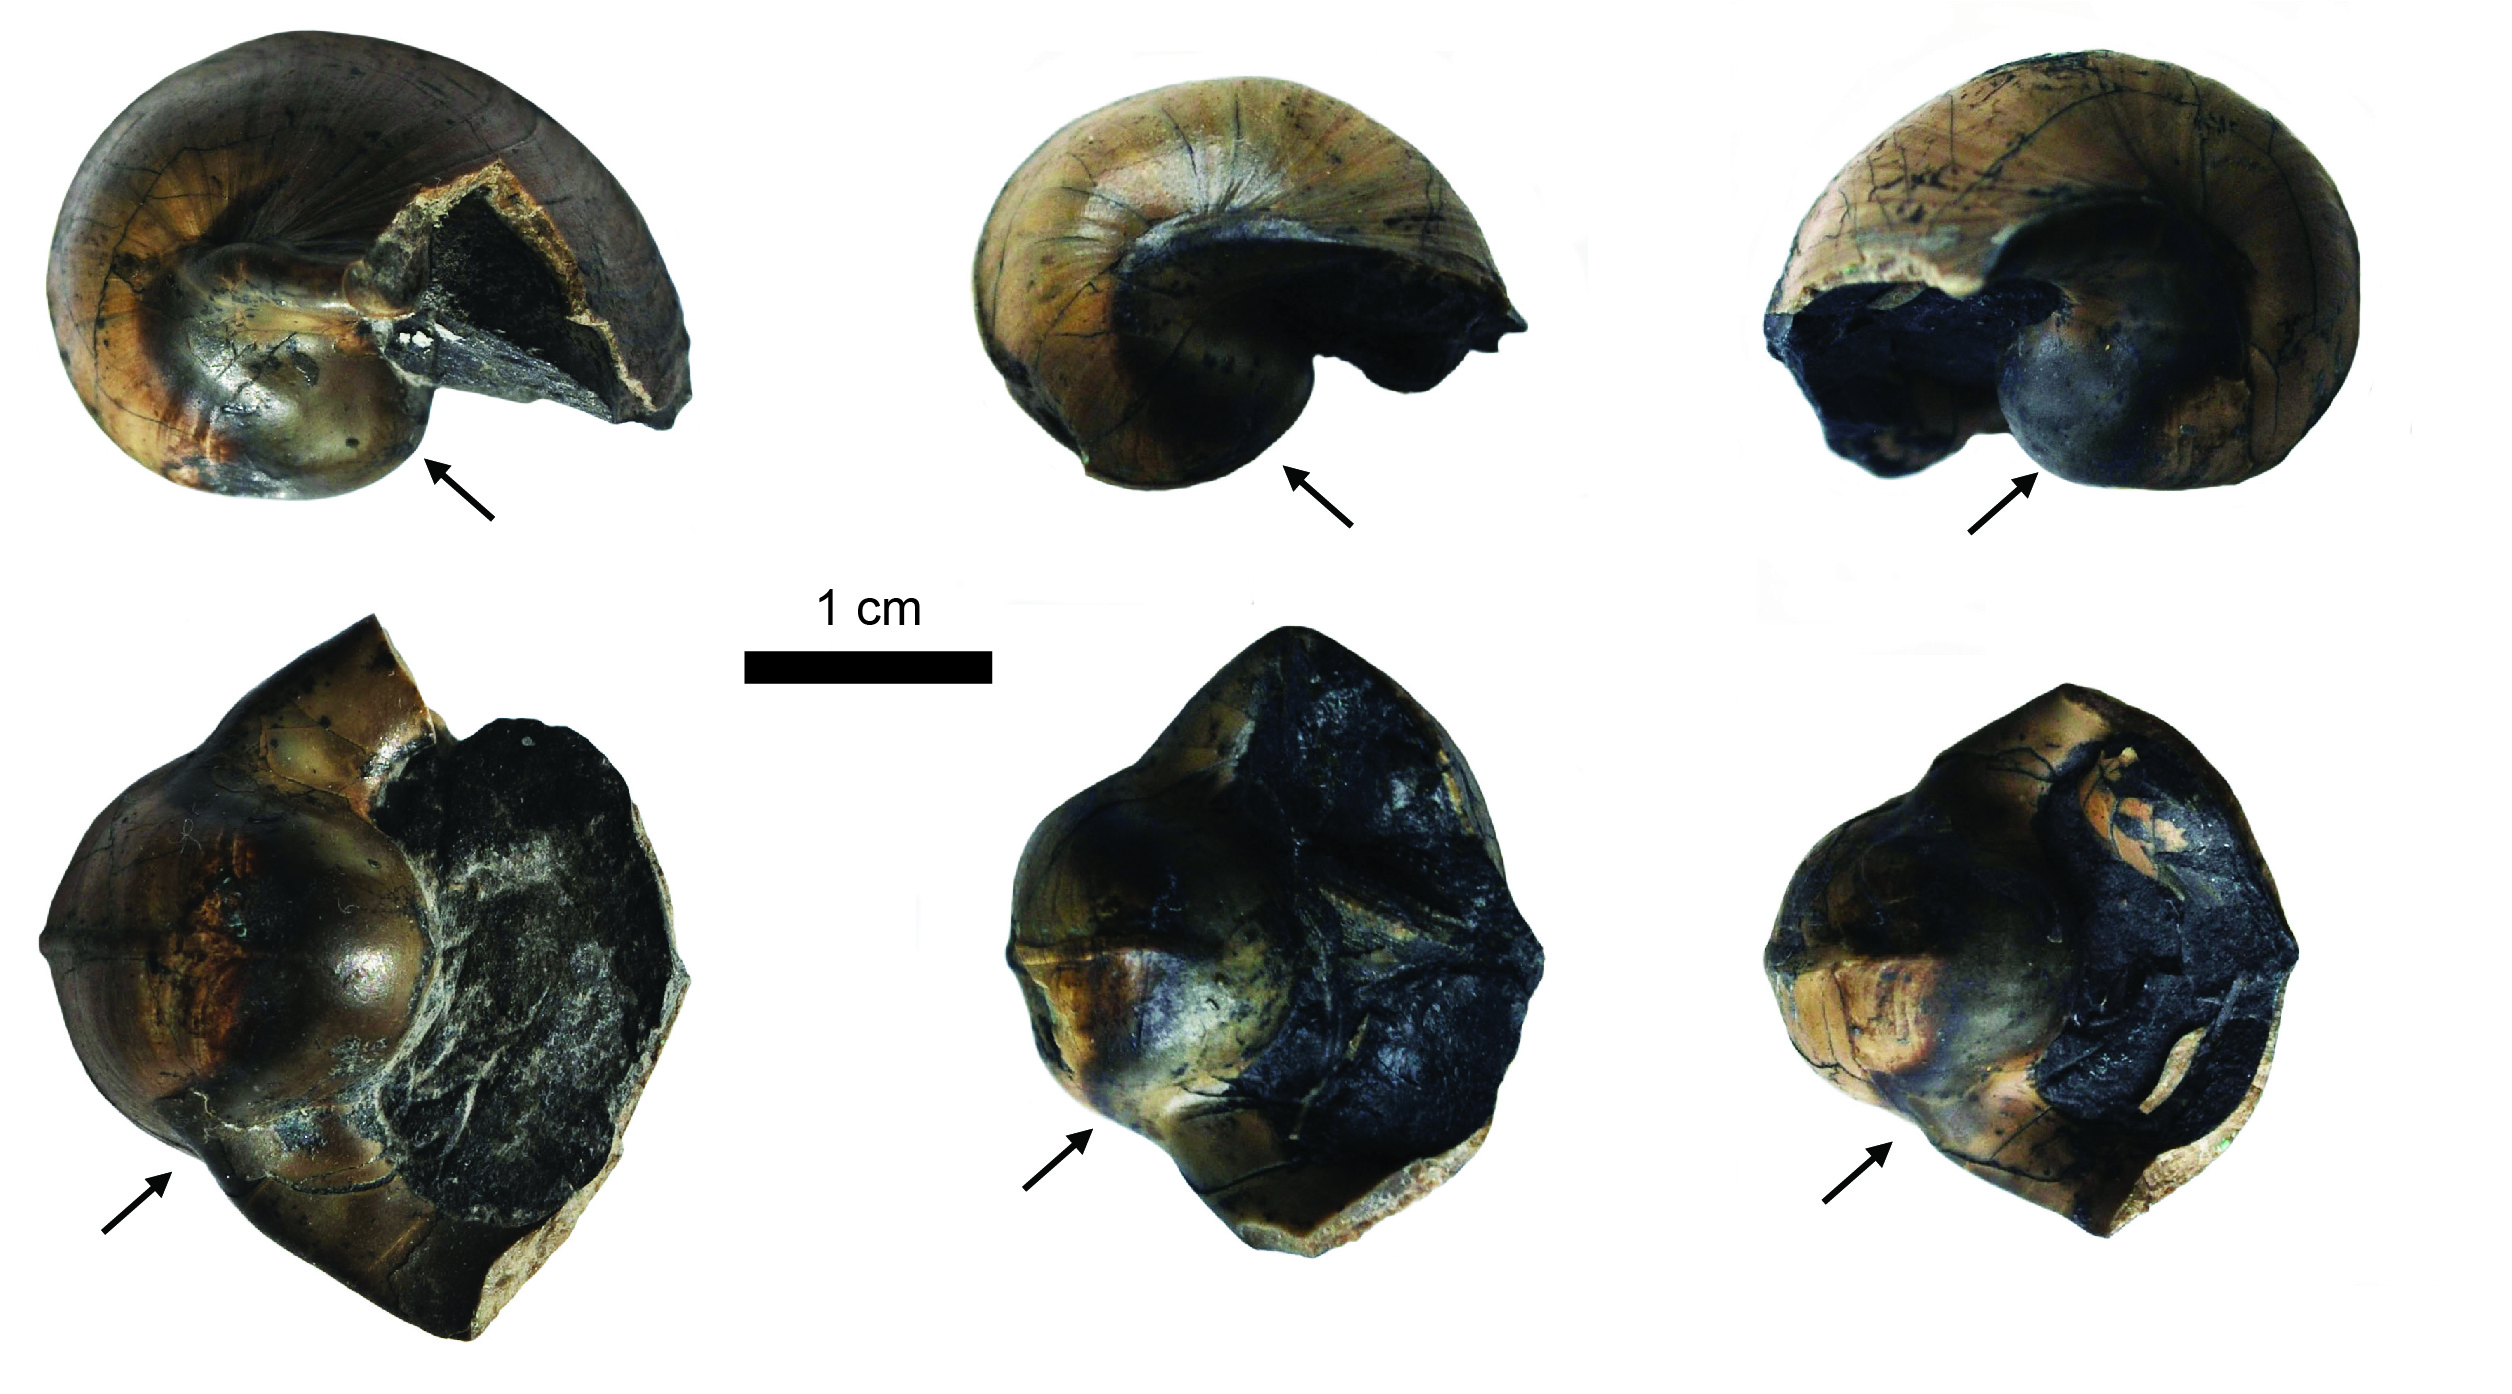 Examples of the specimens from Chesnut and Slucher’s (1990) research collection, showing consistent darker color patches on the inside whorl (arrows).